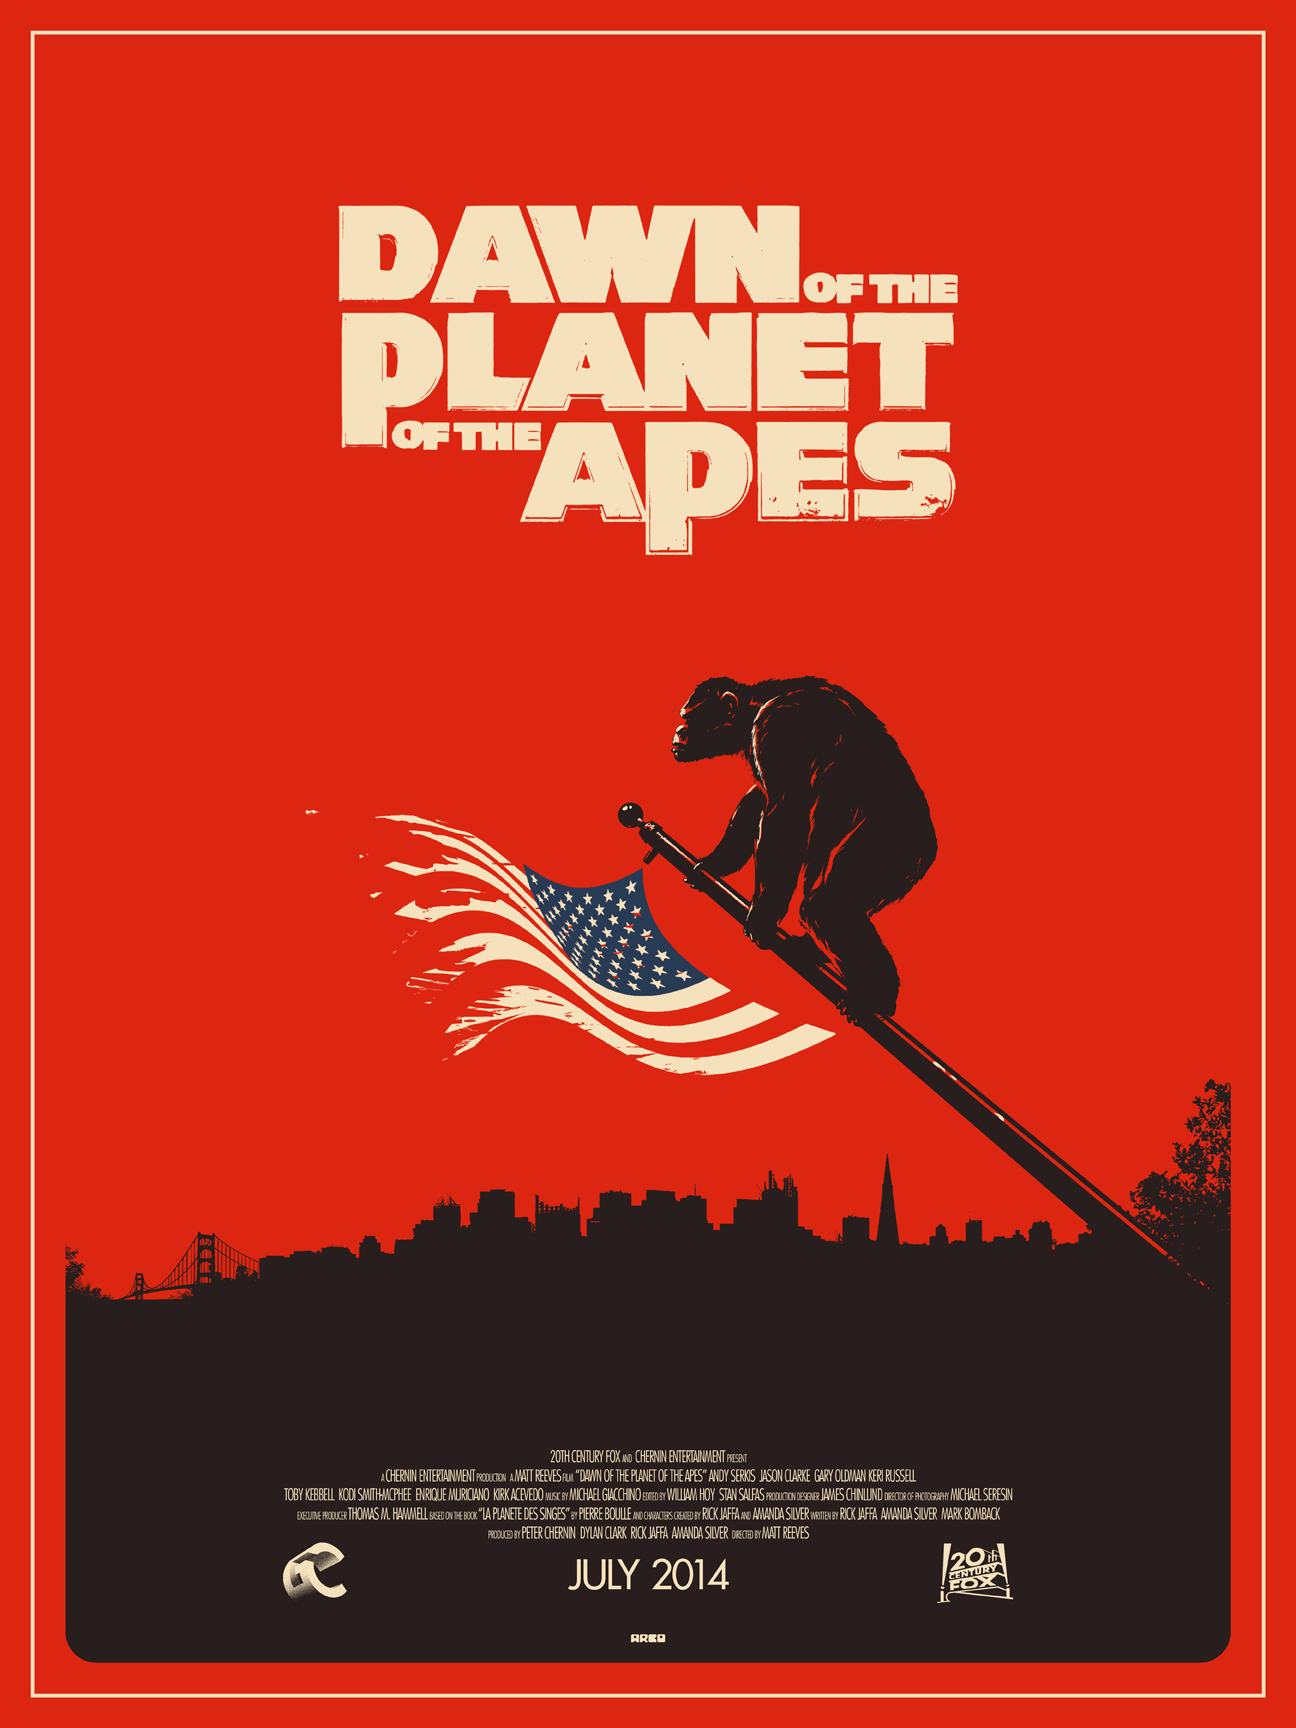 Dawn of the planet of the apes by Matt Ferguson